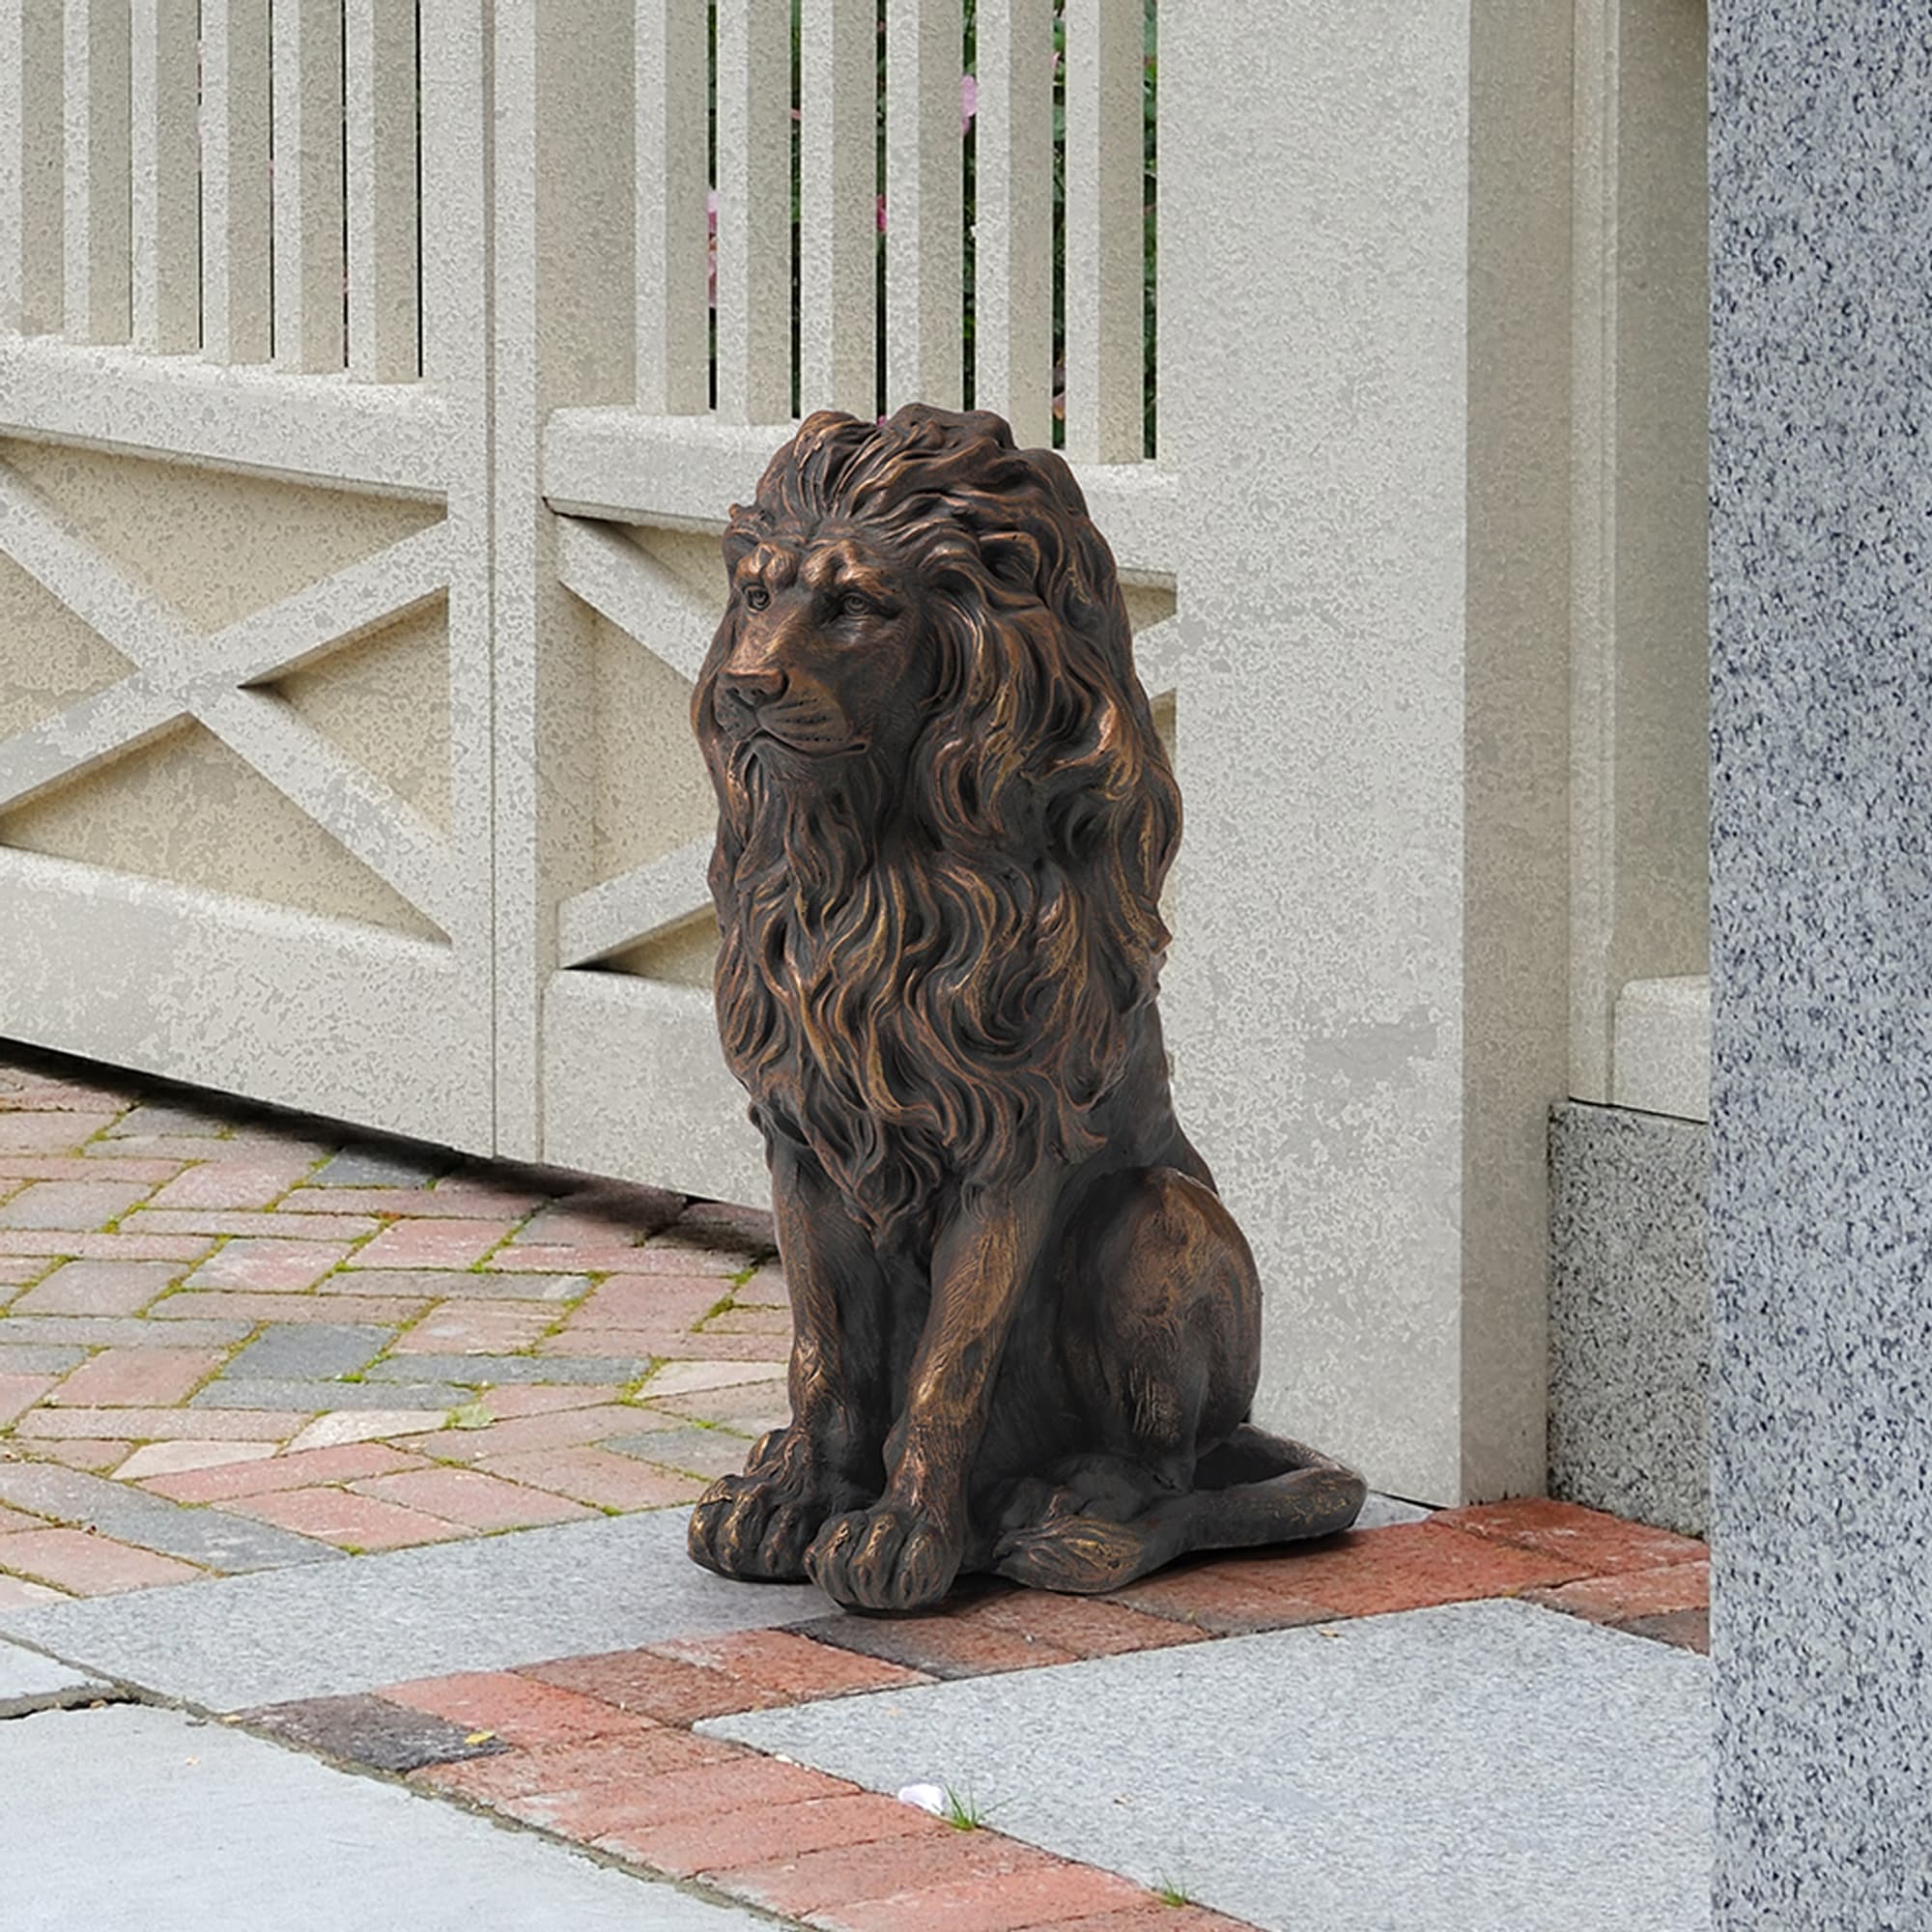 https://ak1.ostkcdn.com/images/products/is/images/direct/6d1342d4af7cdc58698f5003db9abed25bef16d2/Glitzhome-MGO-Vintage-Sitting-%26-Lying-Lion-Guardian-Garden-Statue-Indoor-Outdoor.jpg